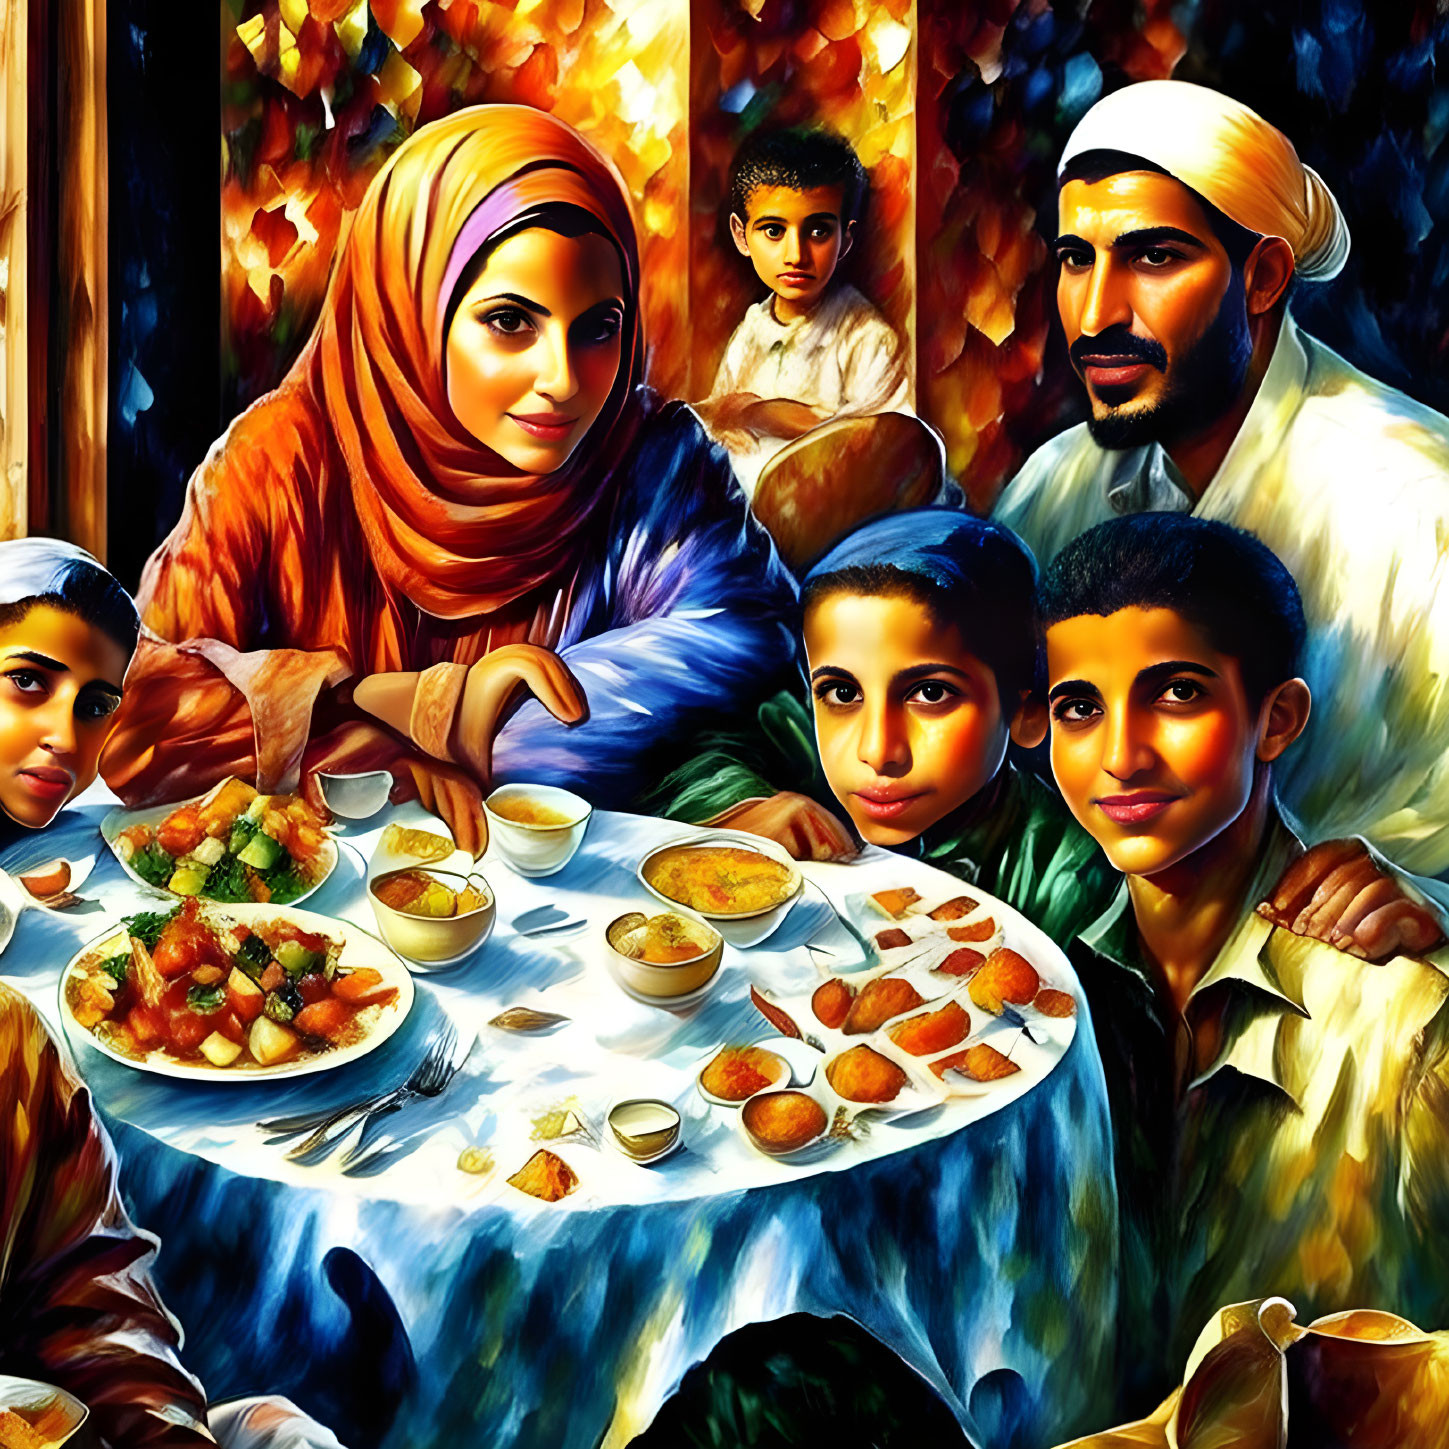 Colorful Middle Eastern family enjoying meal together in vibrant painting